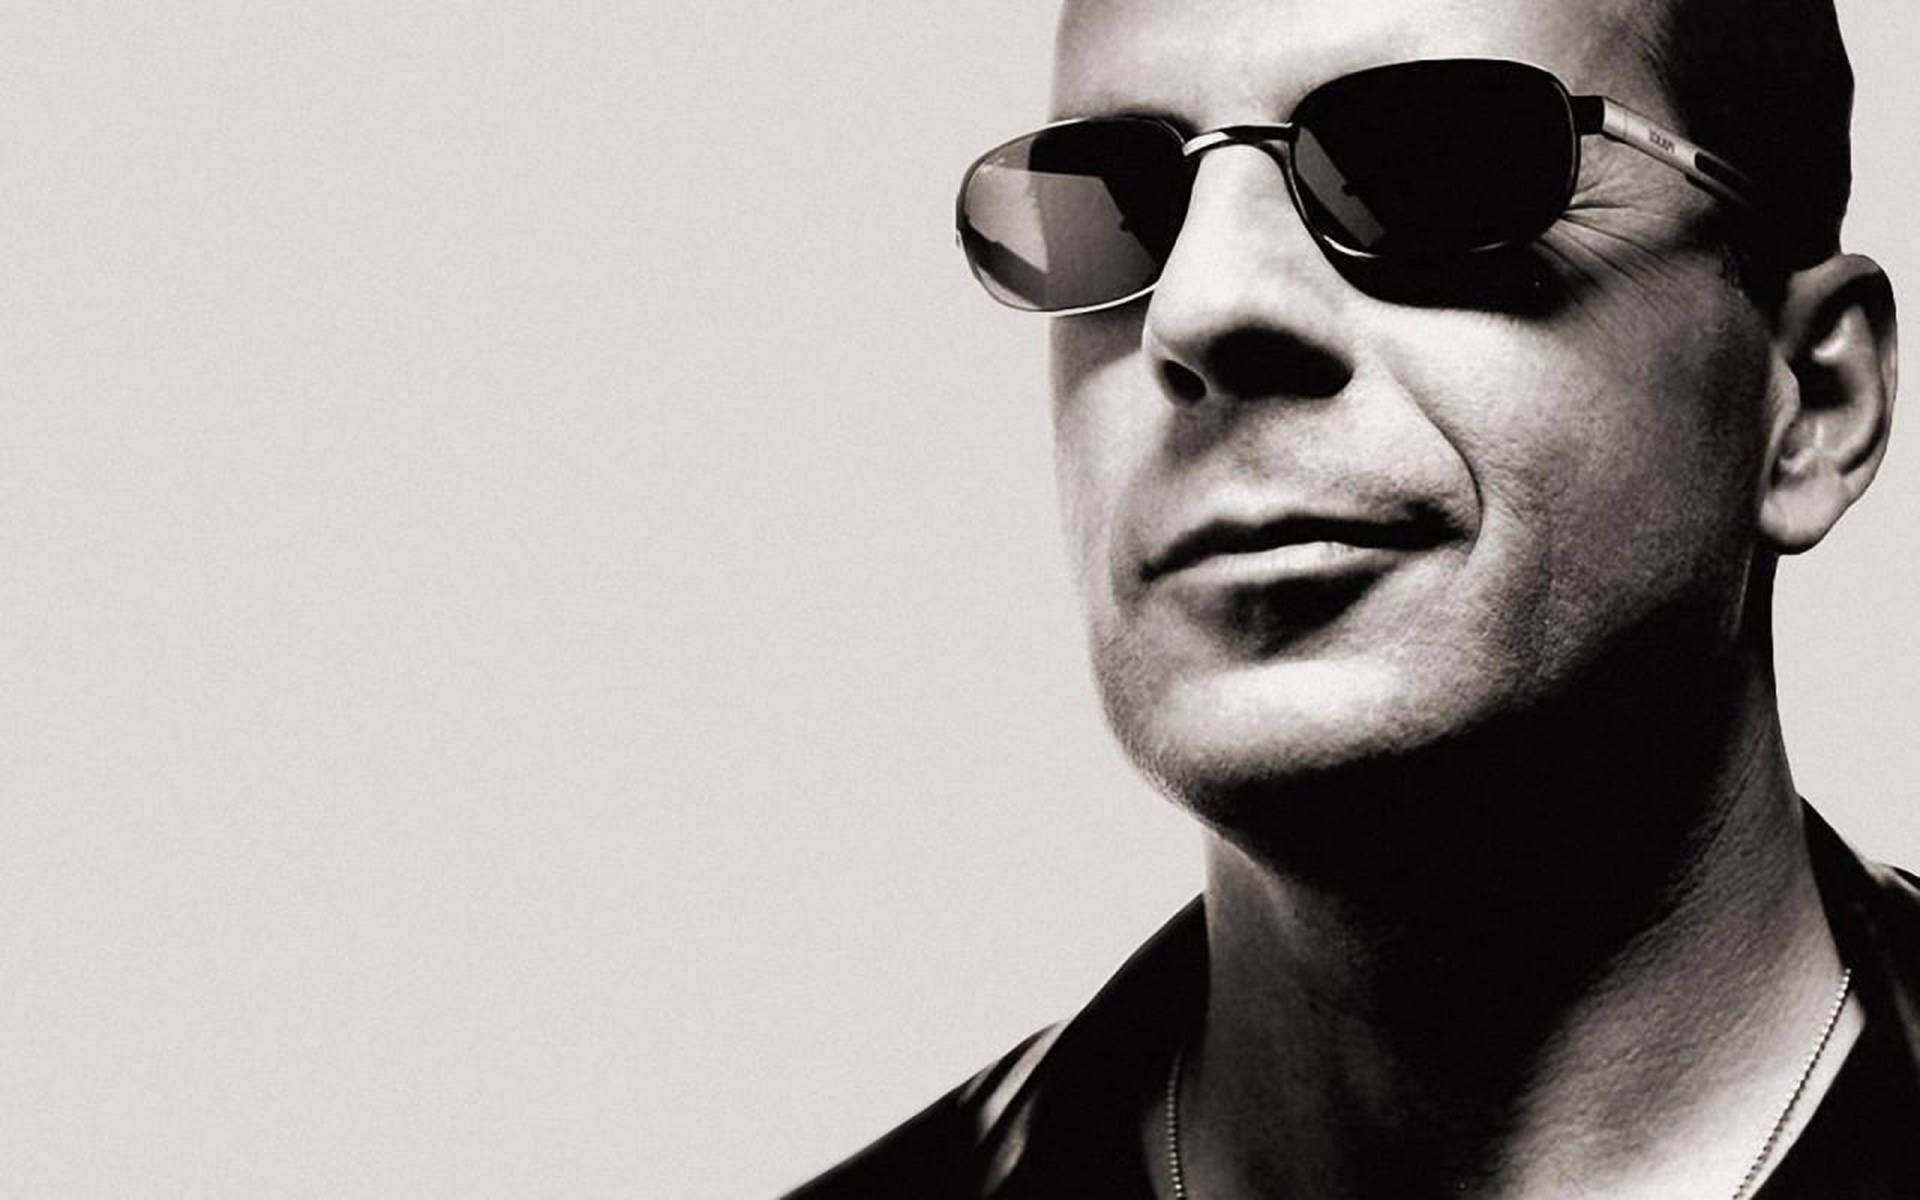 Hollywood Action Star Bruce Willis In Sunglasses